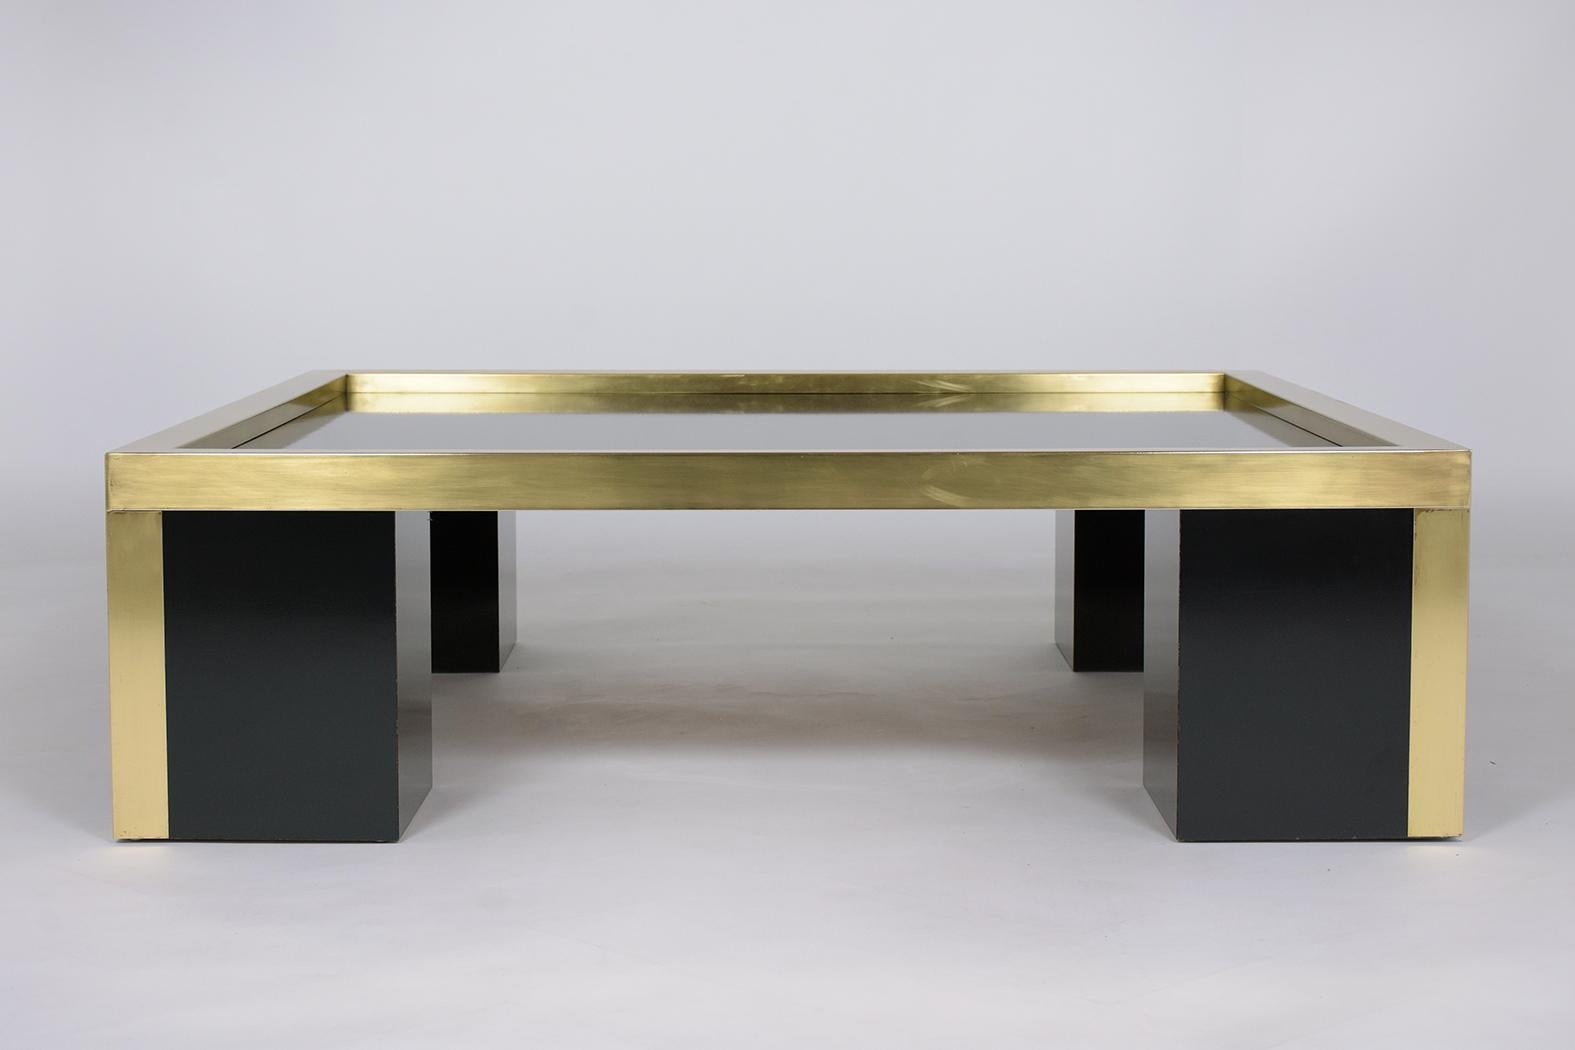 Introducing our captivating mid-century modern coffee table, an emblem of the 1960s design philosophy, masterfully brought to life using brass and laminated wood. The result of painstaking craftsmanship, this vintage table stands testimony to the